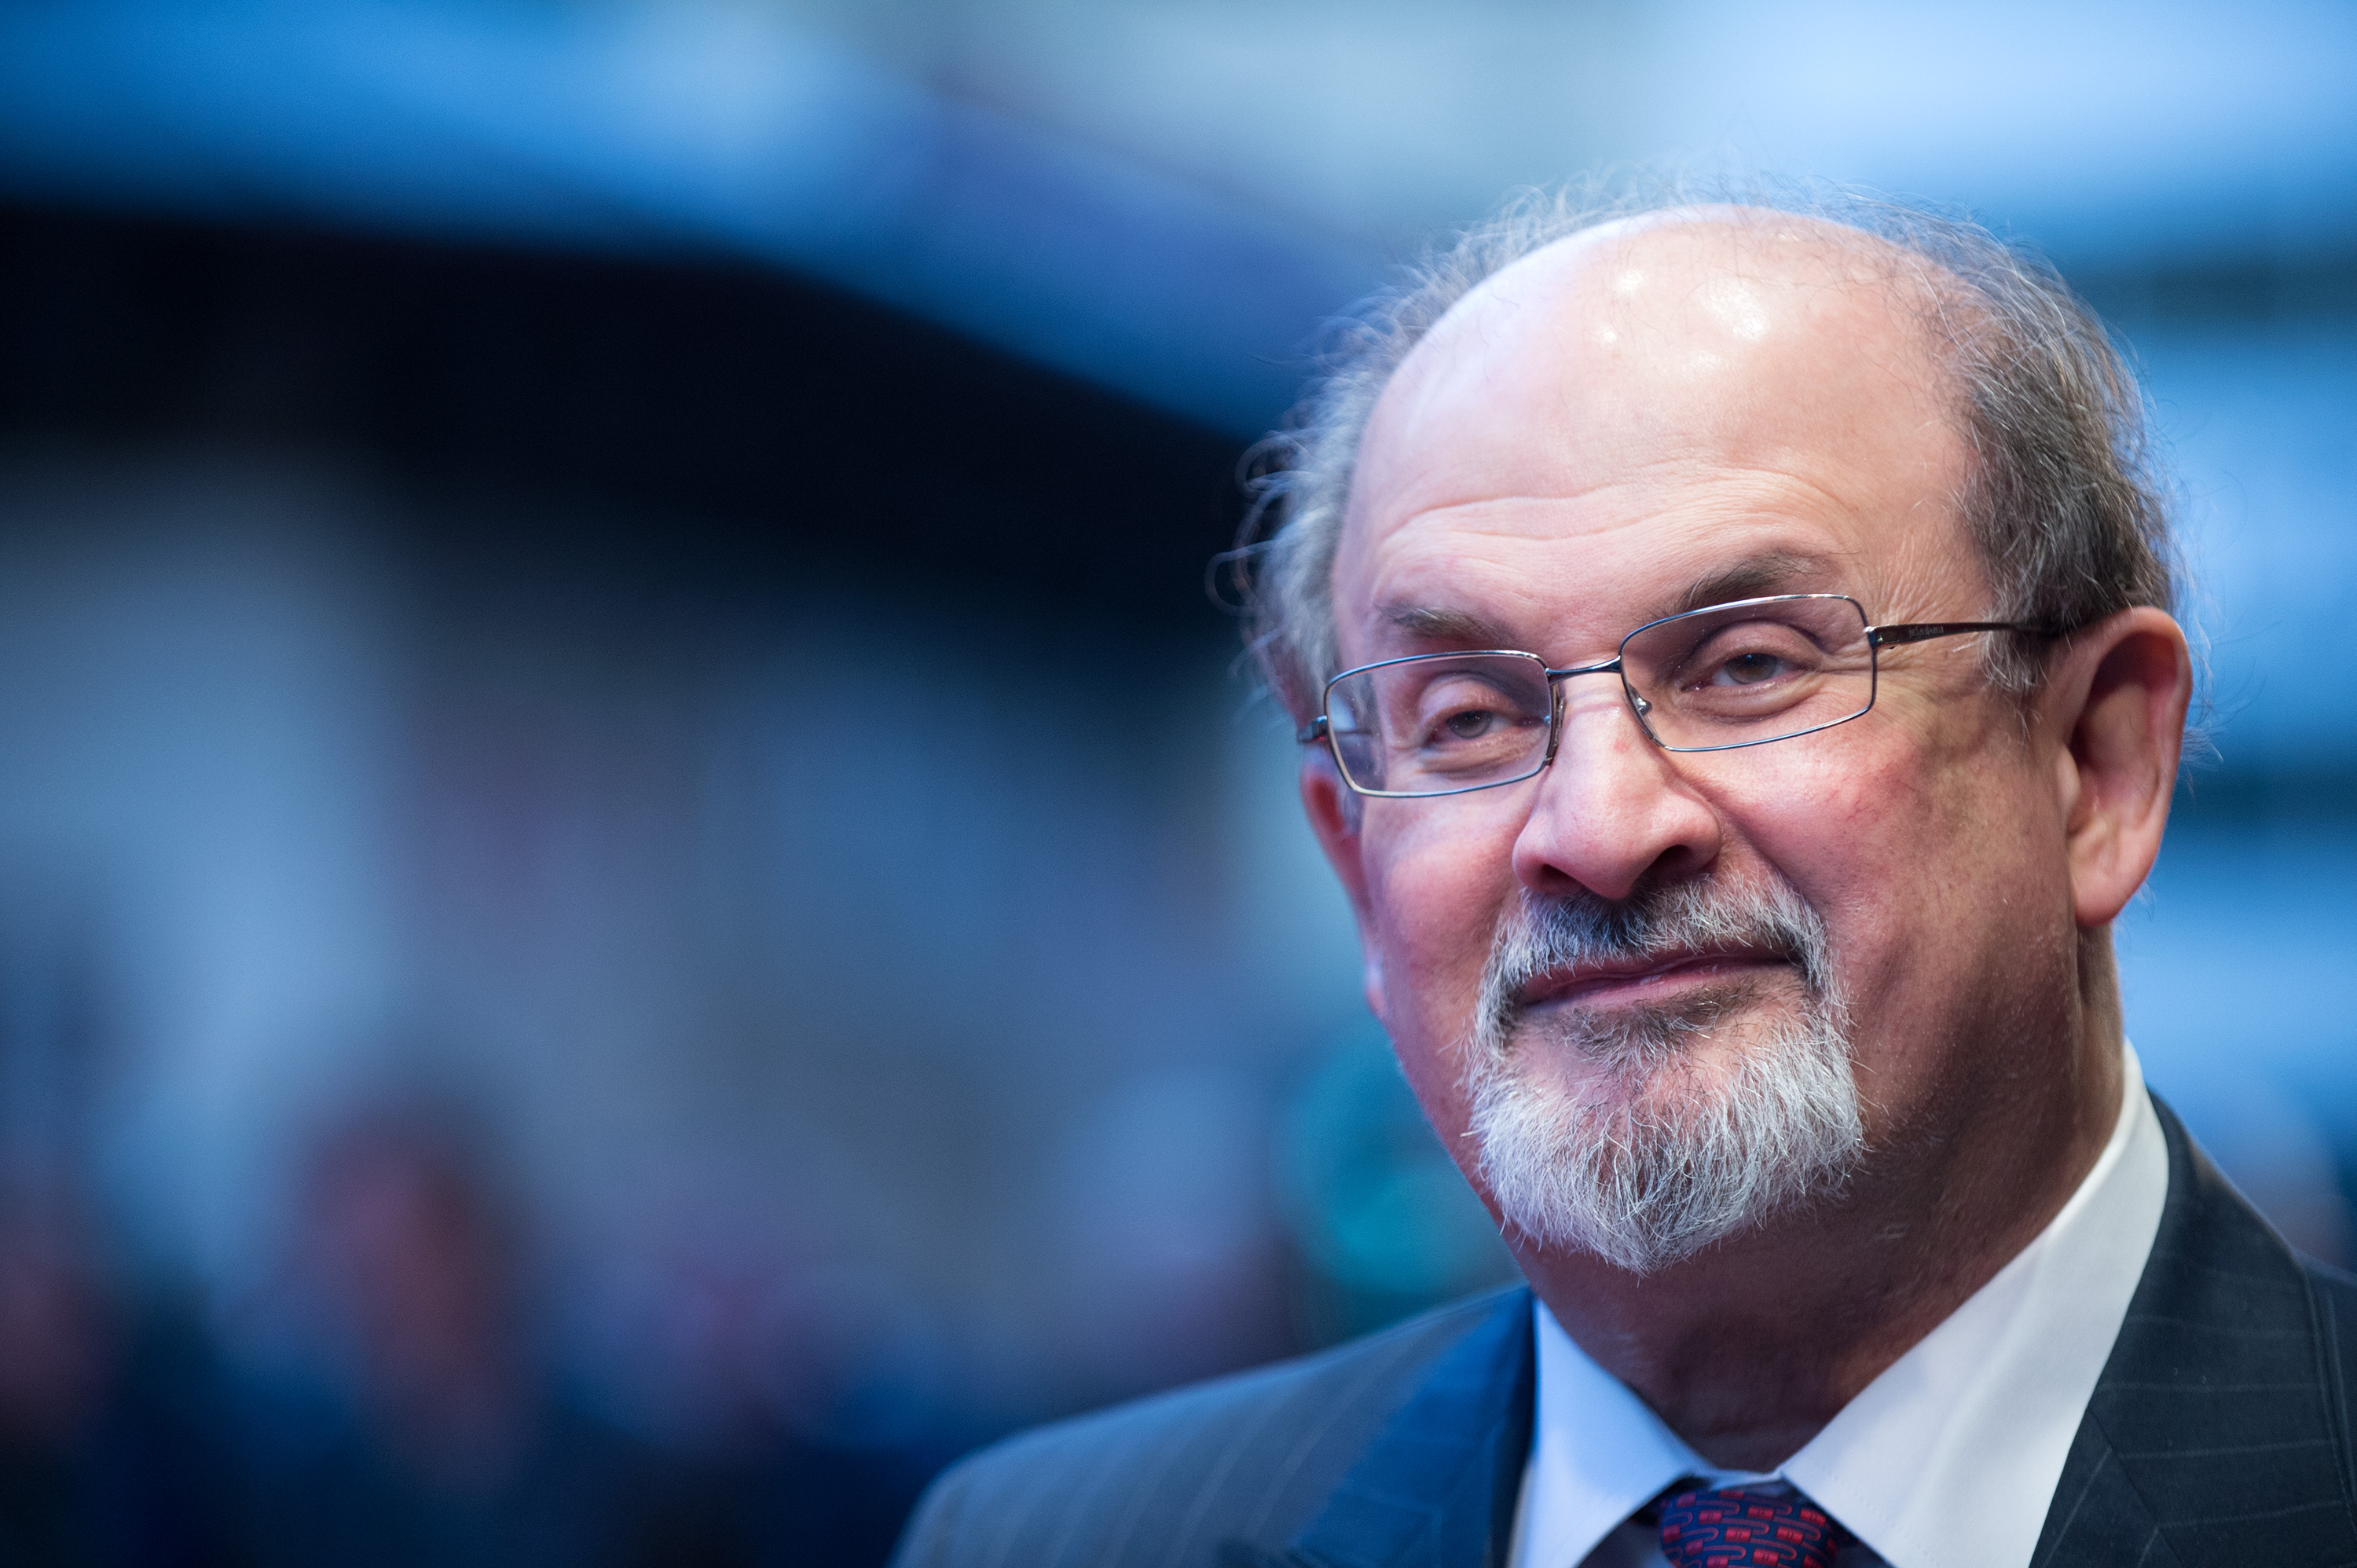 Salman Rushdie attends the premiere of 'Midnight's Children' during the 56th BFI London Film Festival at Odeon West End on Oct. 14, 2012 in London, England. (Ben Pruchnie—Getty Images)